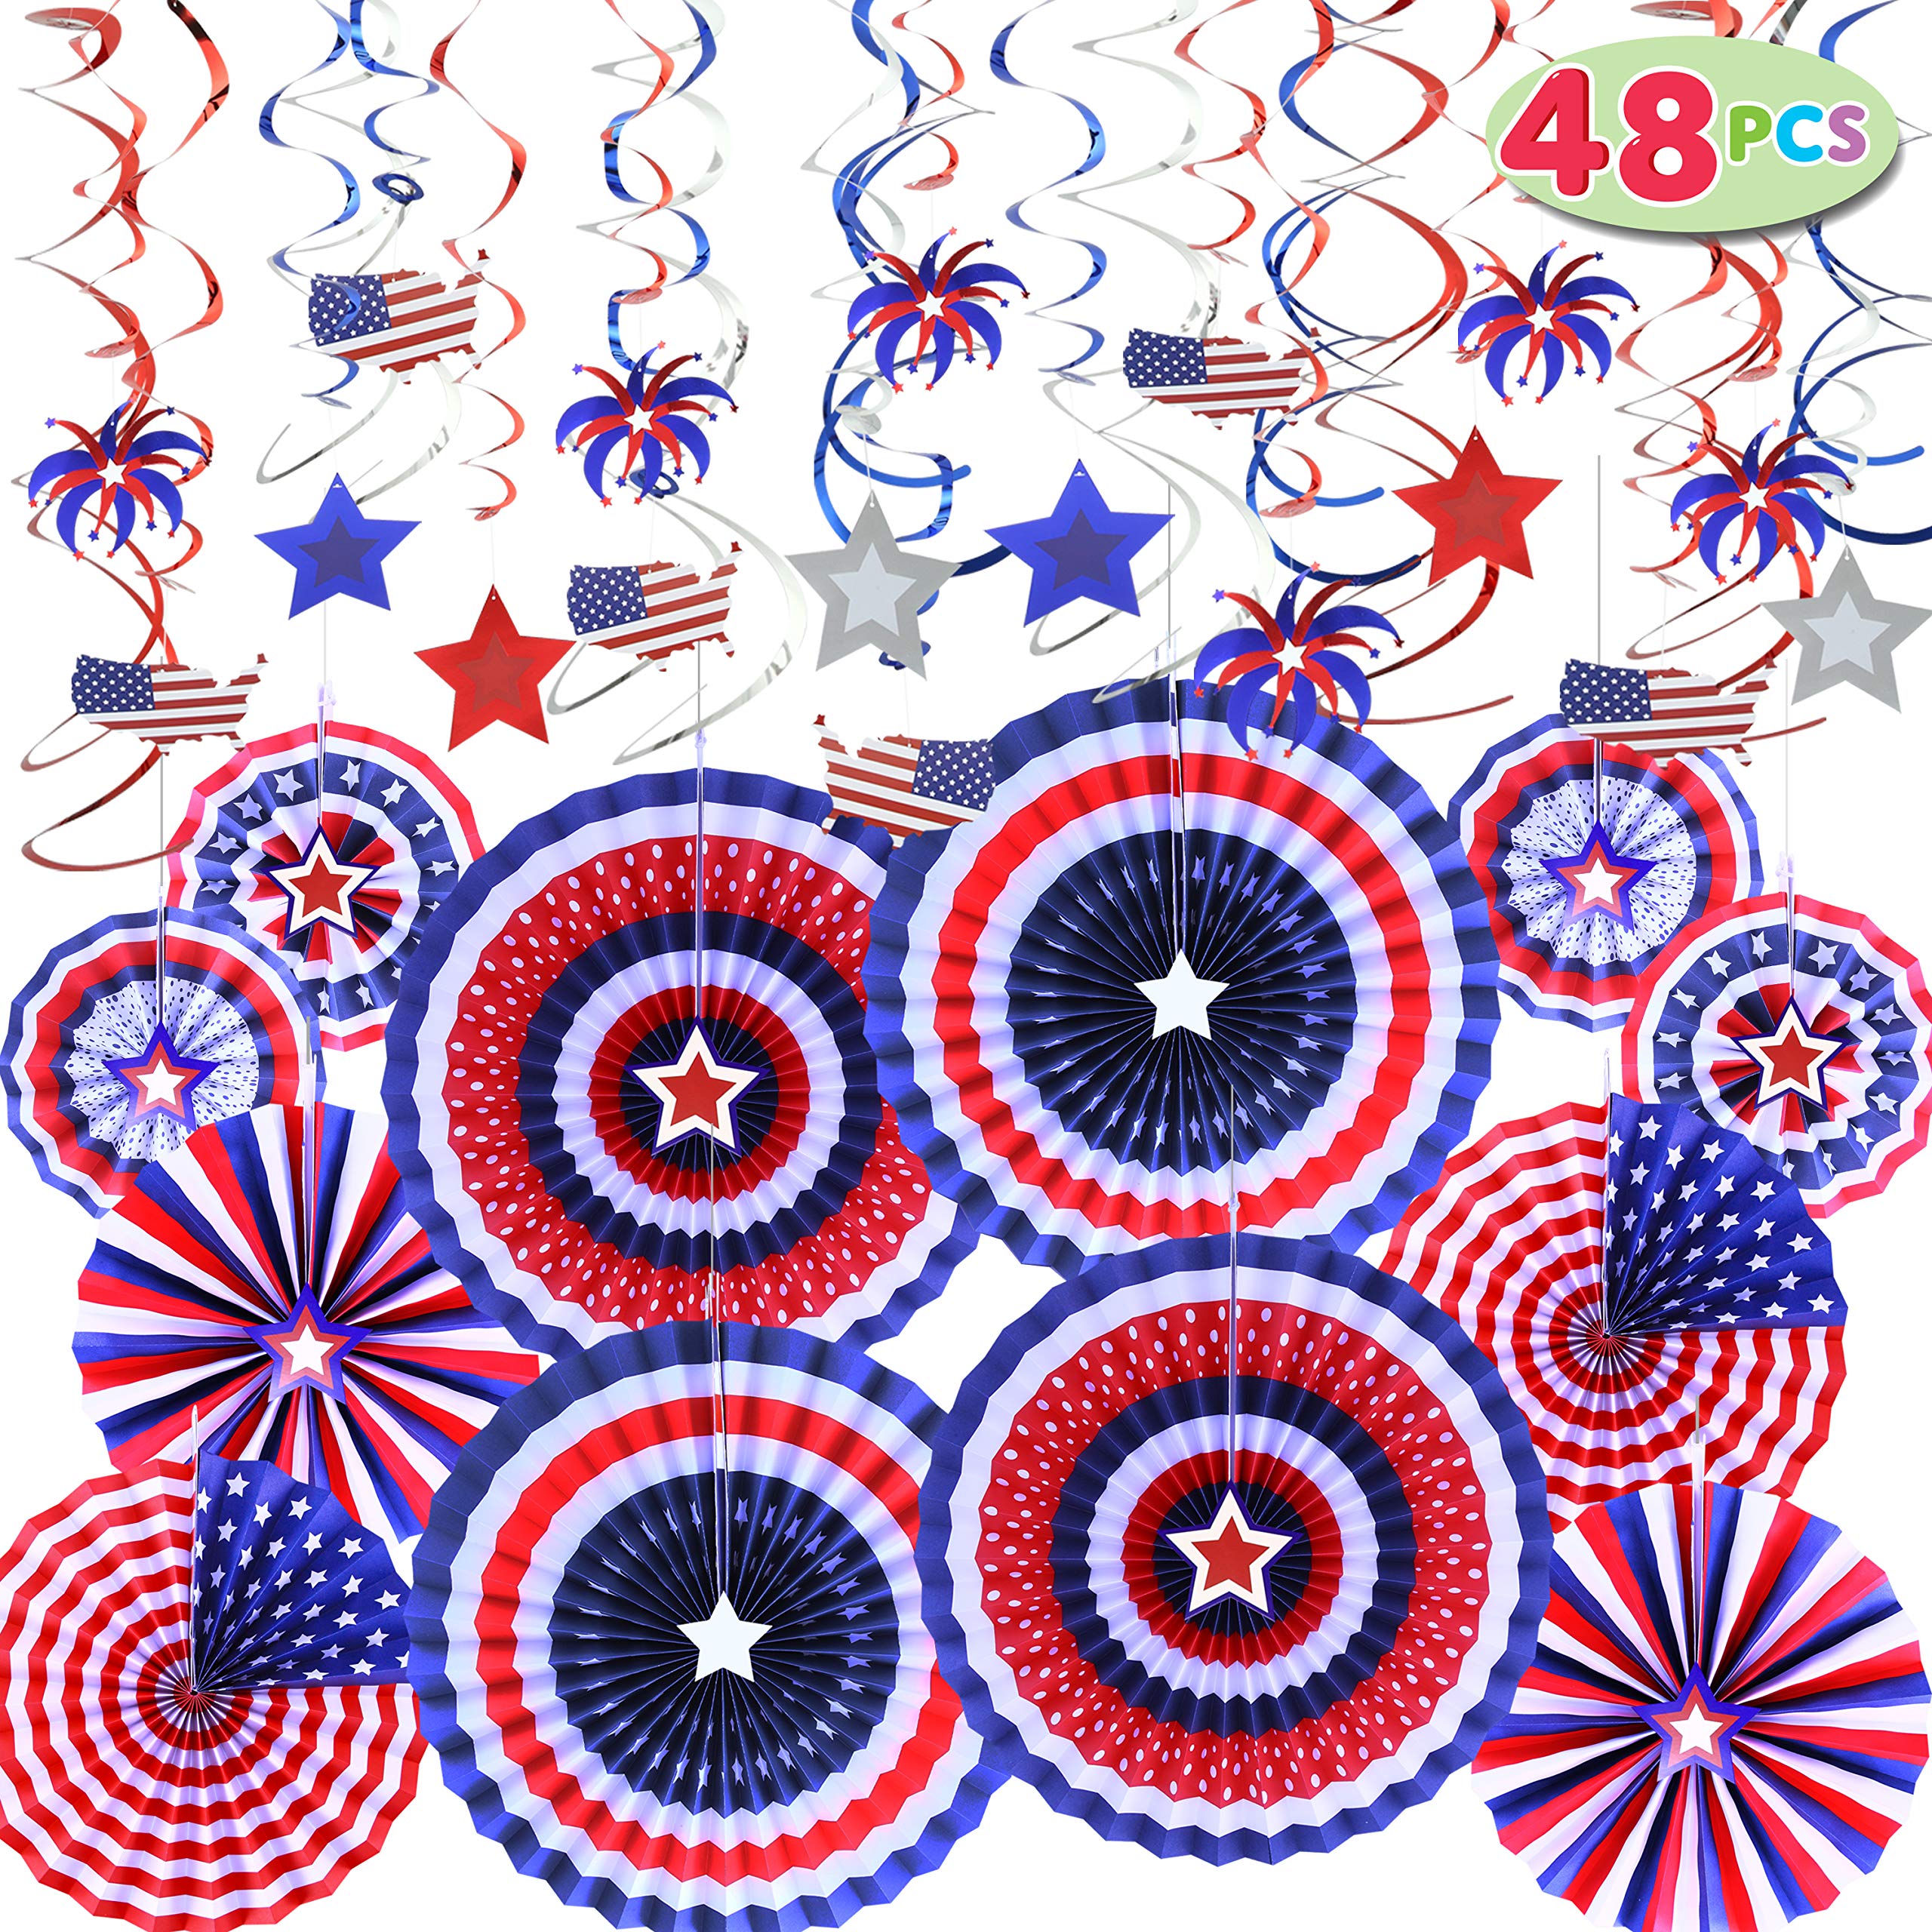 48 Pc. JOYIN Patriotic Party Decorations of 12 Paper Fan, 36 Swirl Streamers for 4th of July $9.99 + Free Ship w/Prime